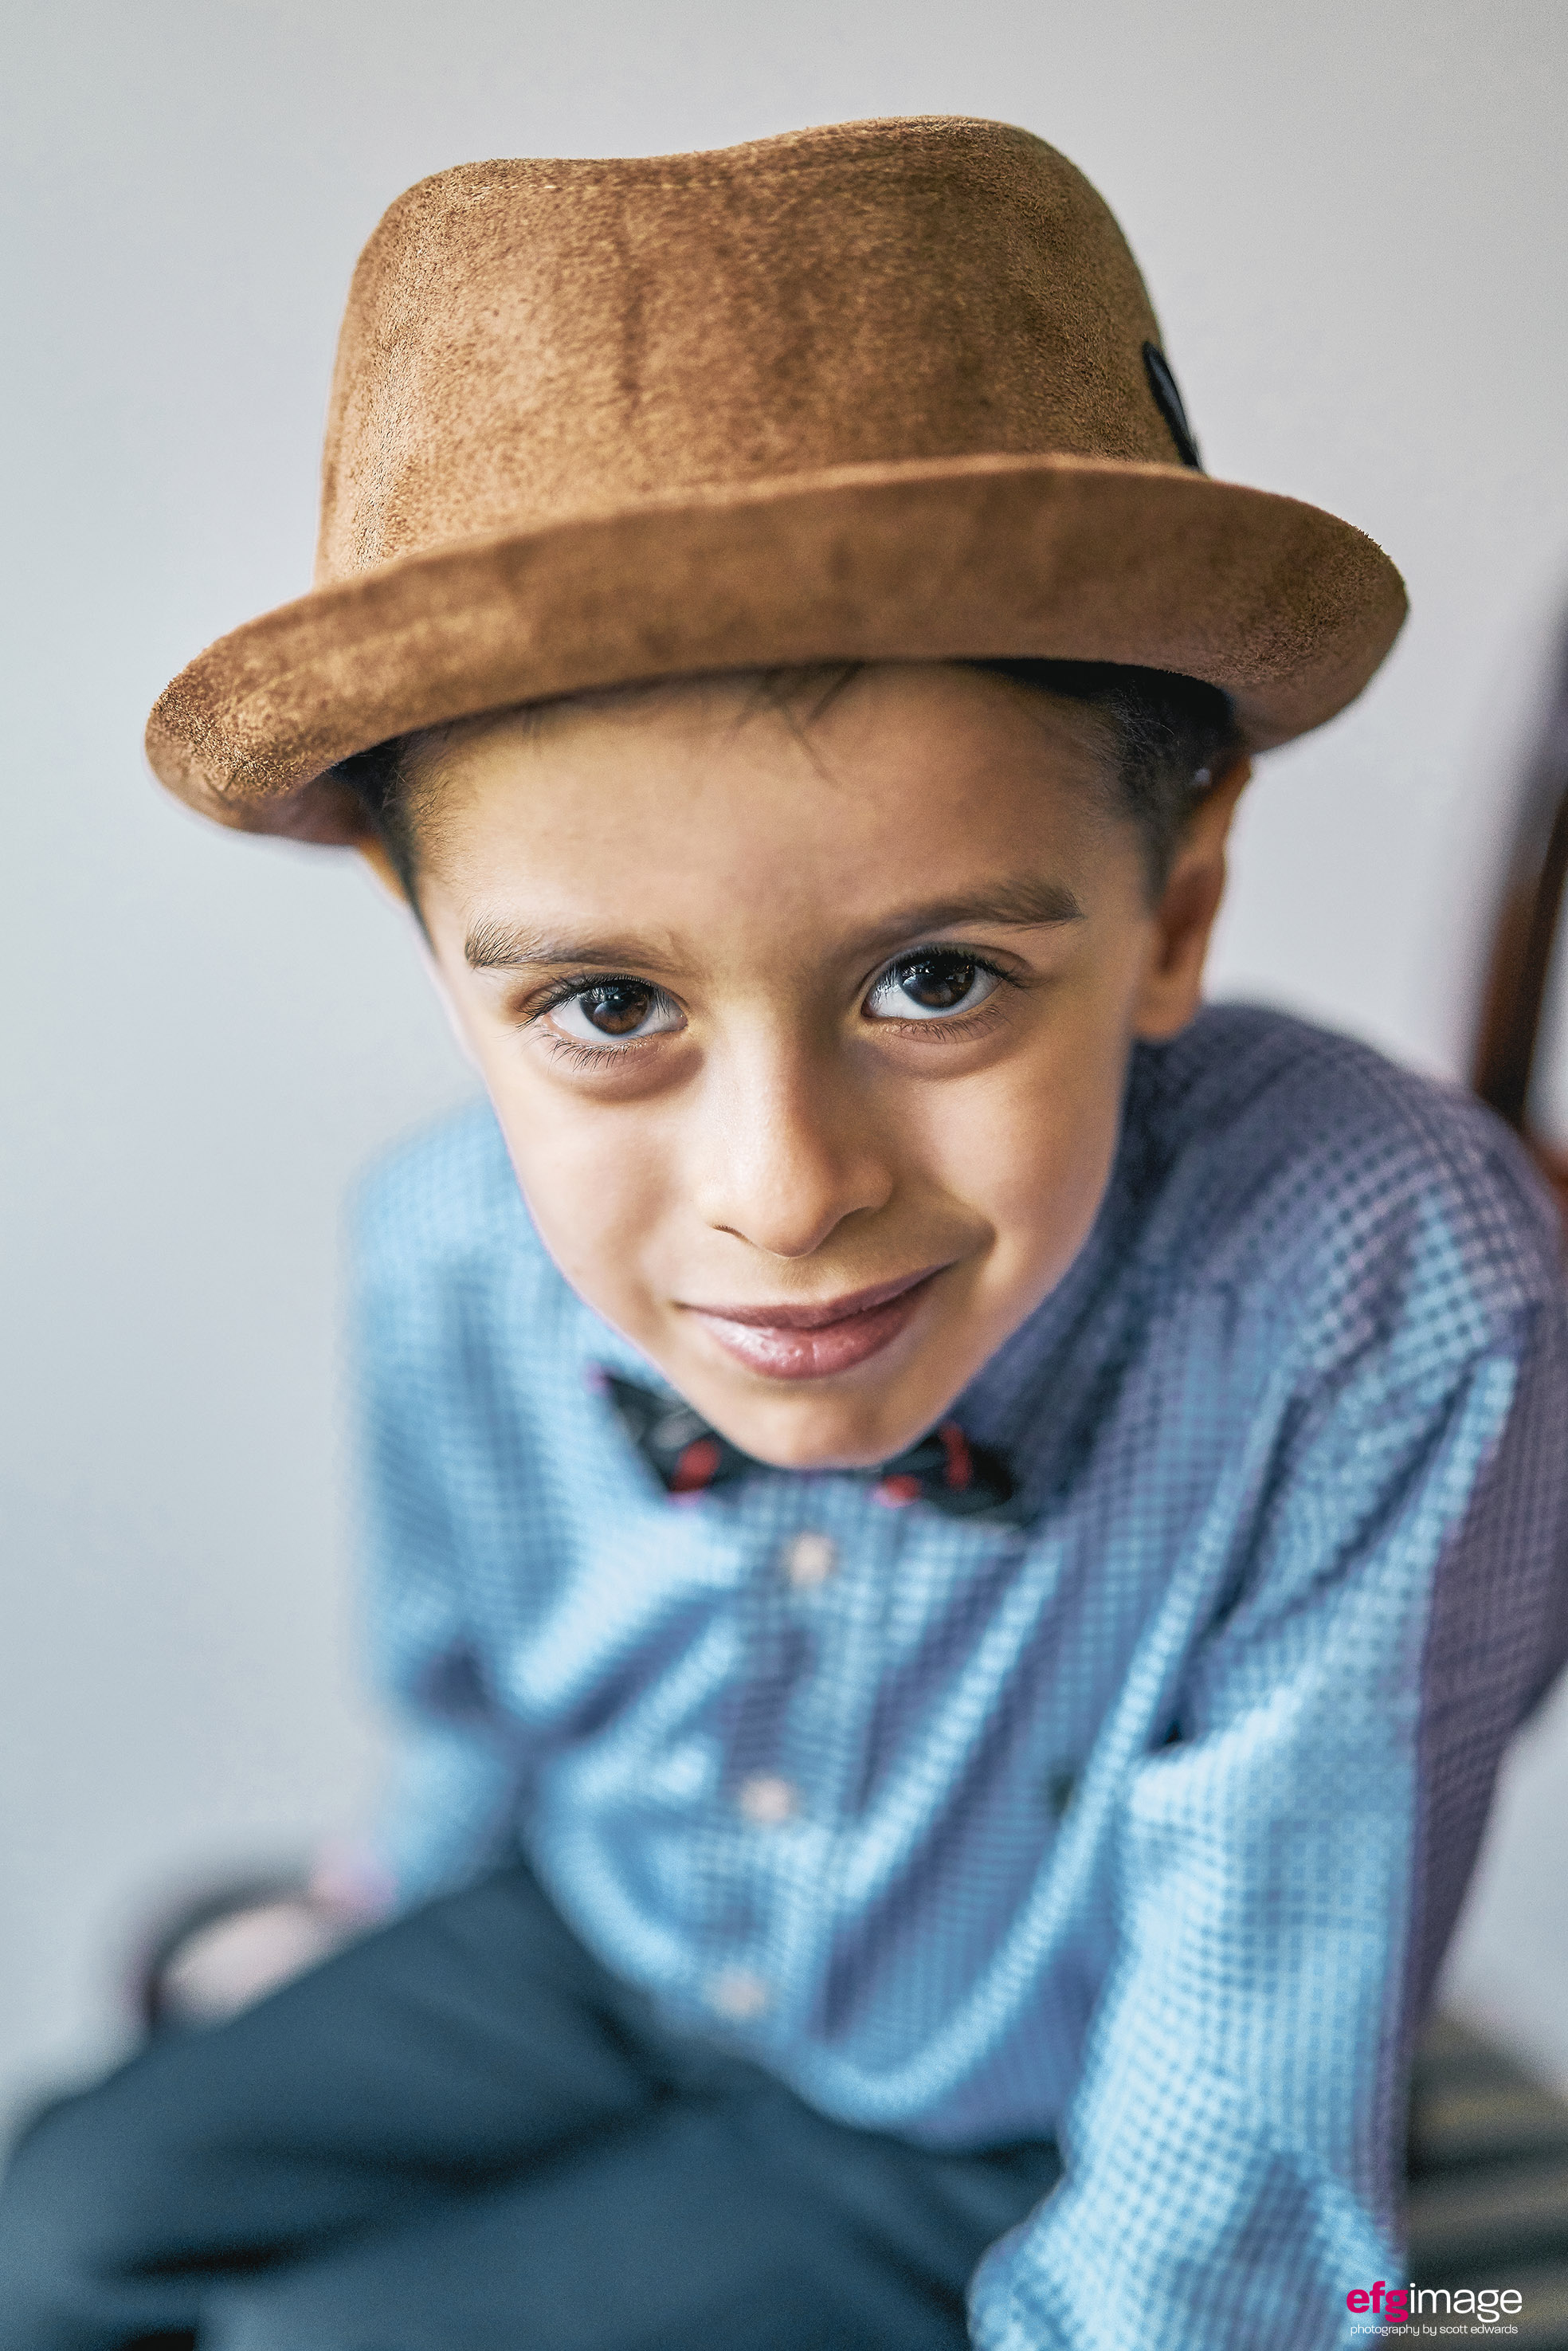 beautiful young boy with hat